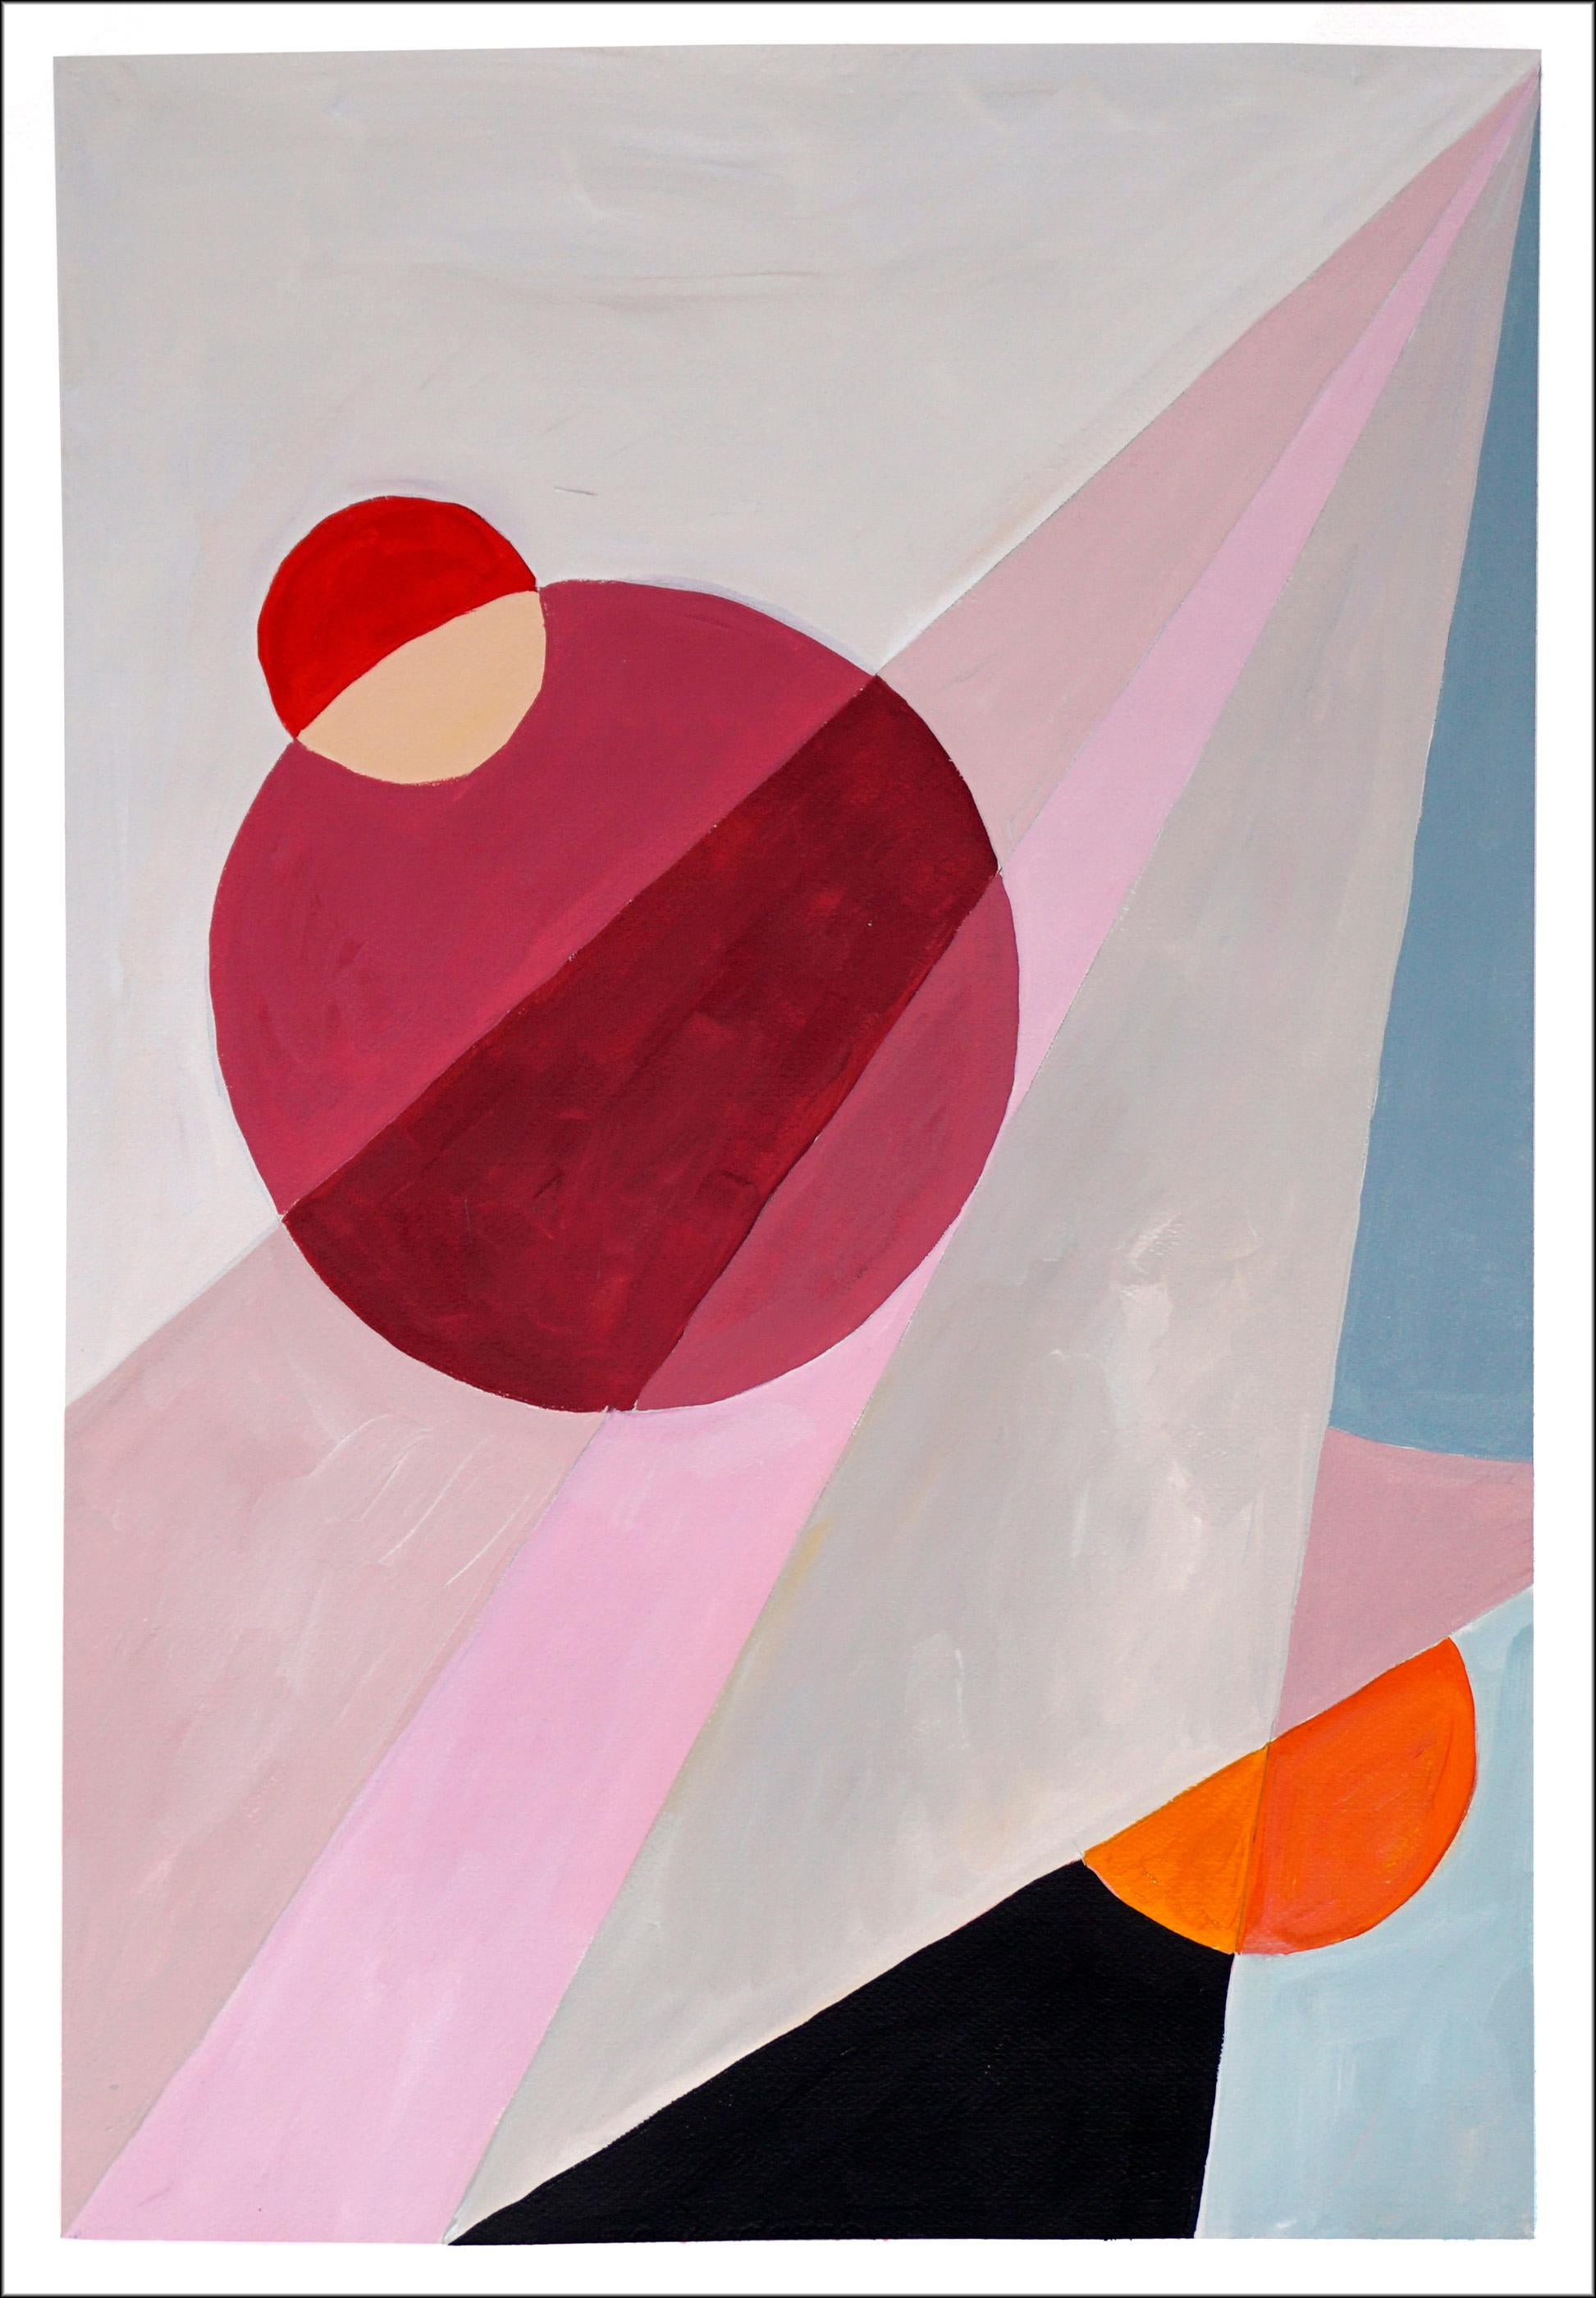 New Mexico Desert Sky, Primary Tones and Black,  Geometry Astronomy Triptych   - Neo-Constructivist Painting by Natalia Roman